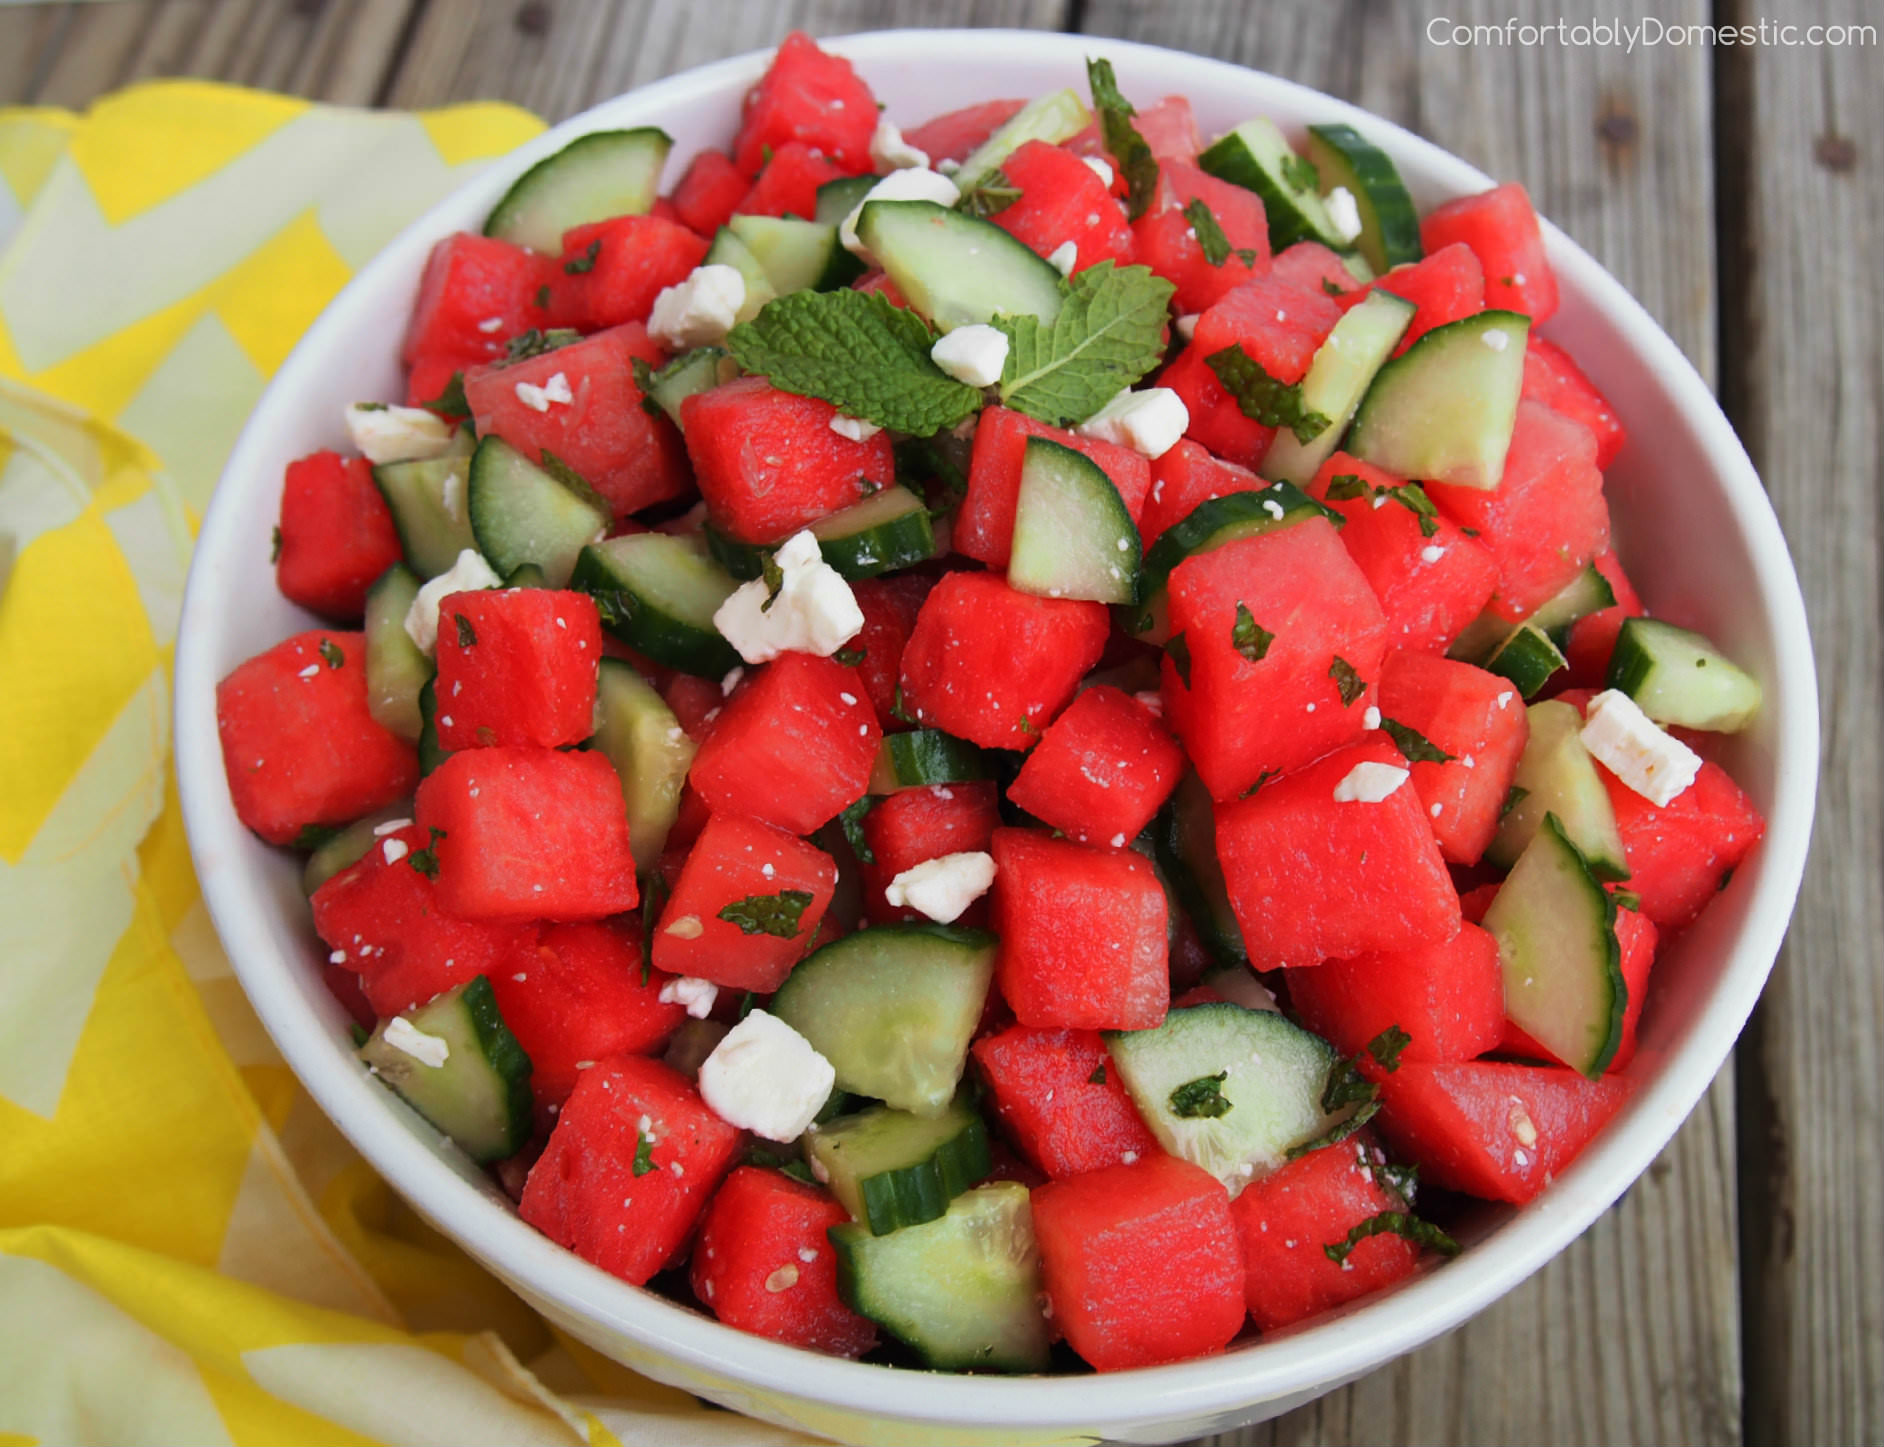 ComfortablyDomestic's Watermelon Cumber Salad with Feta, Mint and Lime 